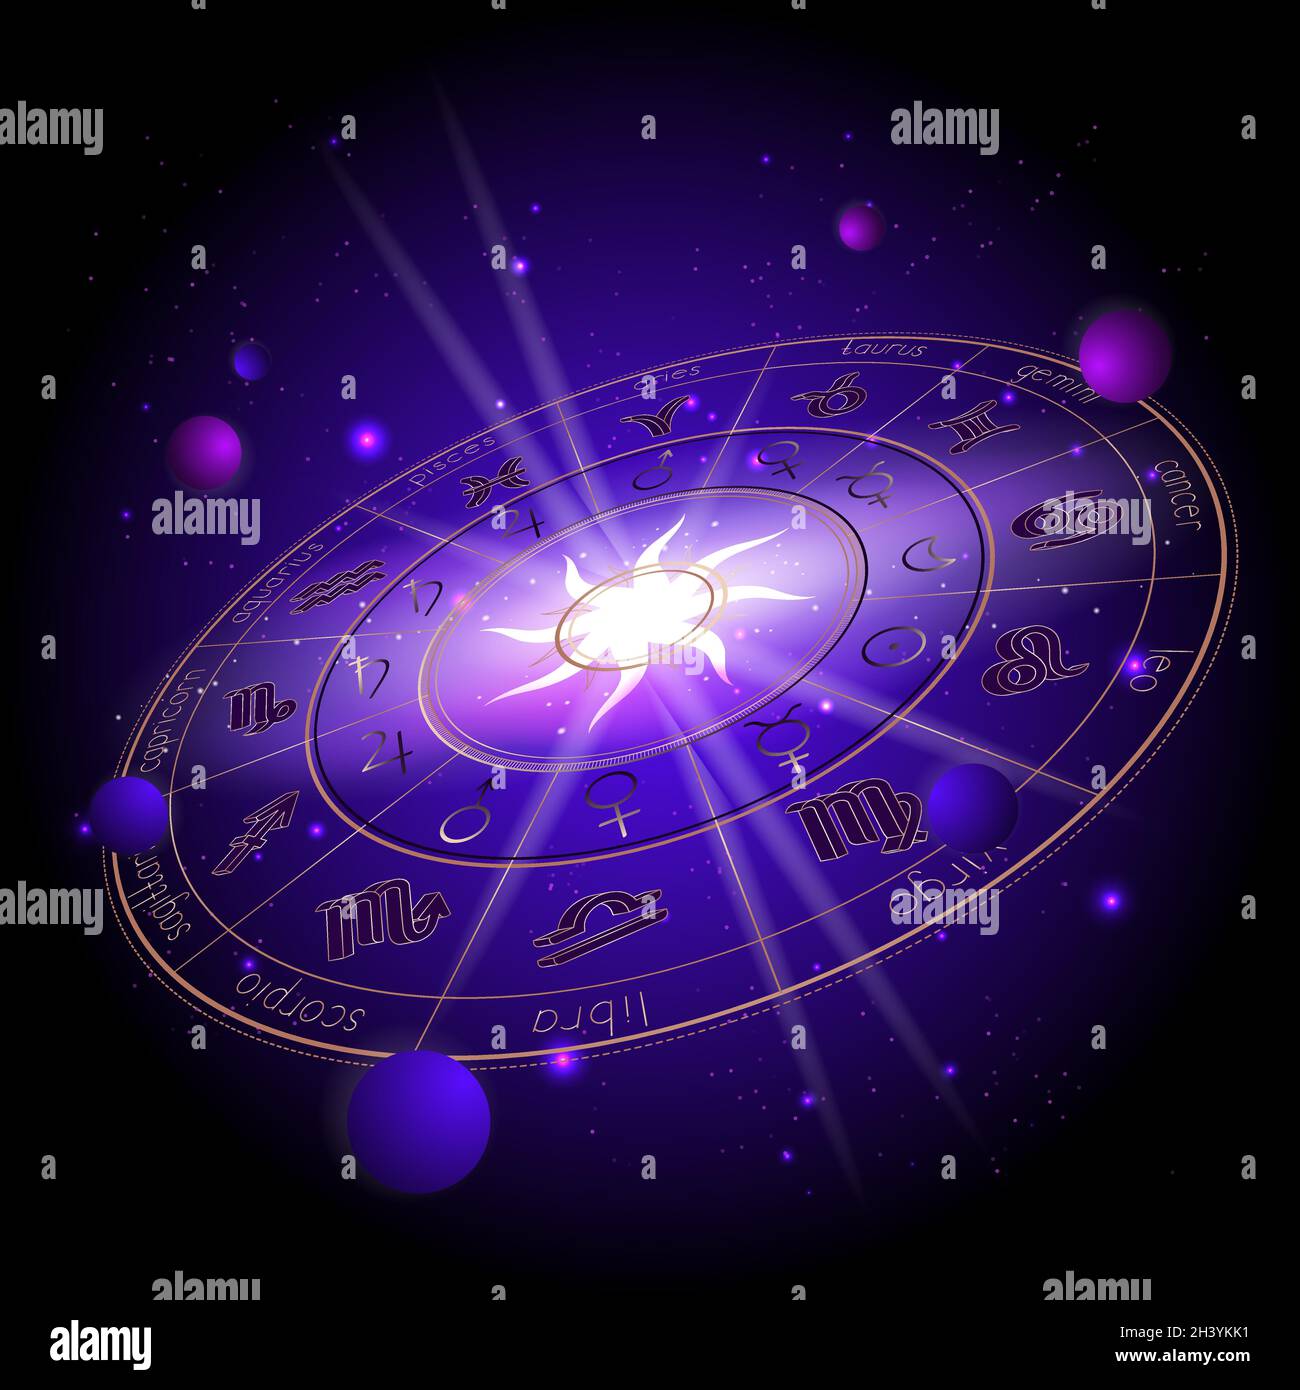 Vector illustration of Horoscope circle in perspective, Zodiac signs and pictograms astrology planets against the space background with planets, stars Stock Vector